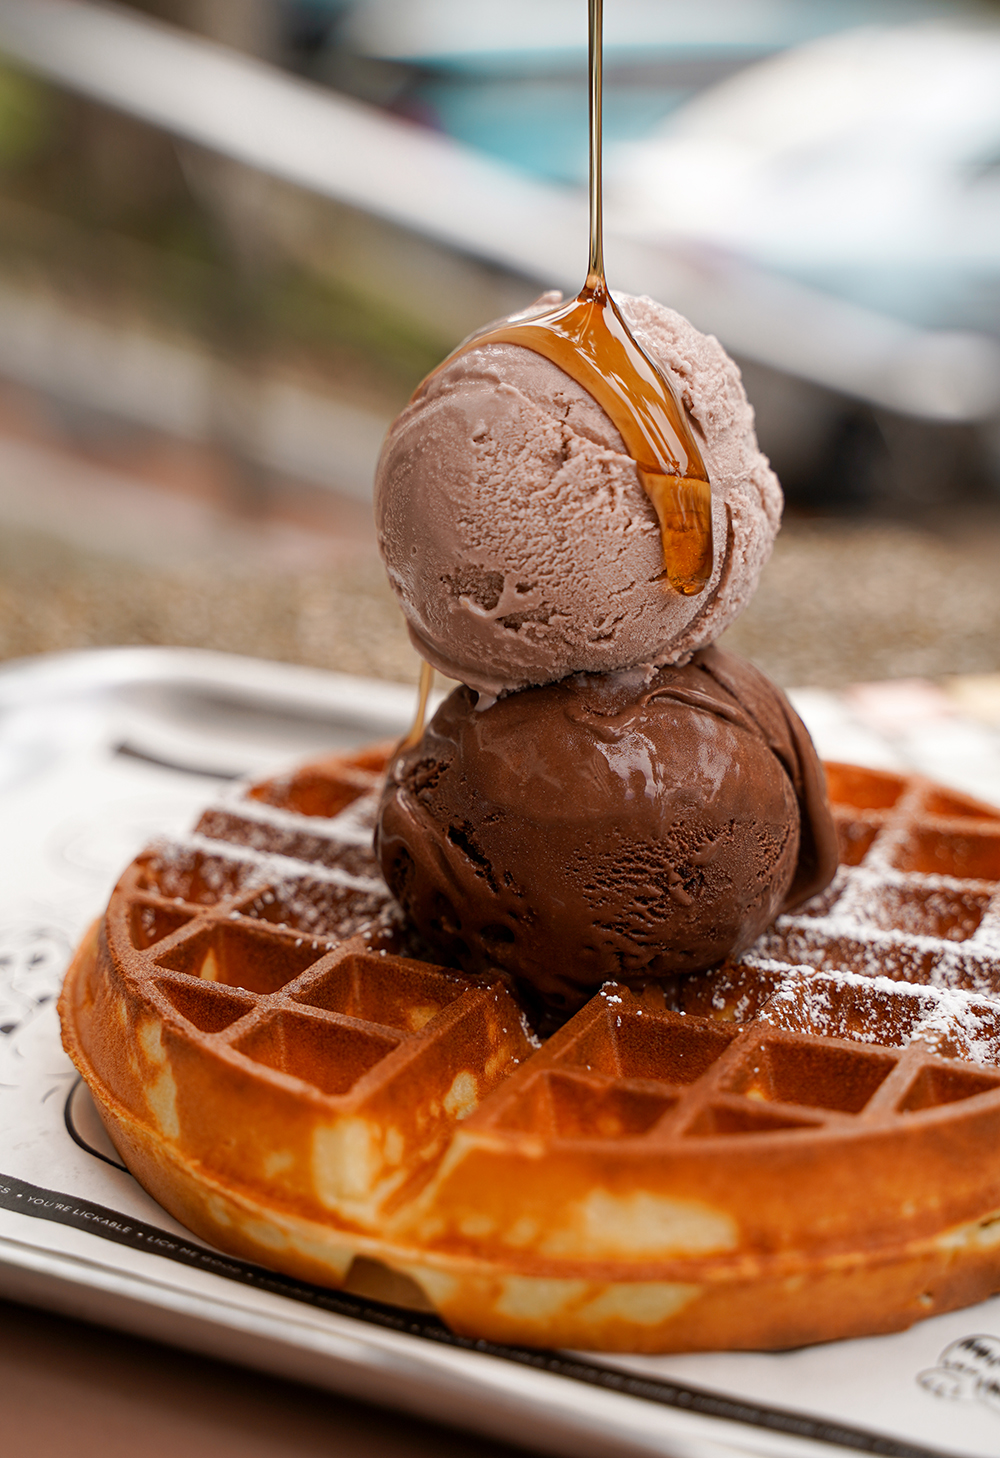 Waffle and ice cream from Lickers, Singapore